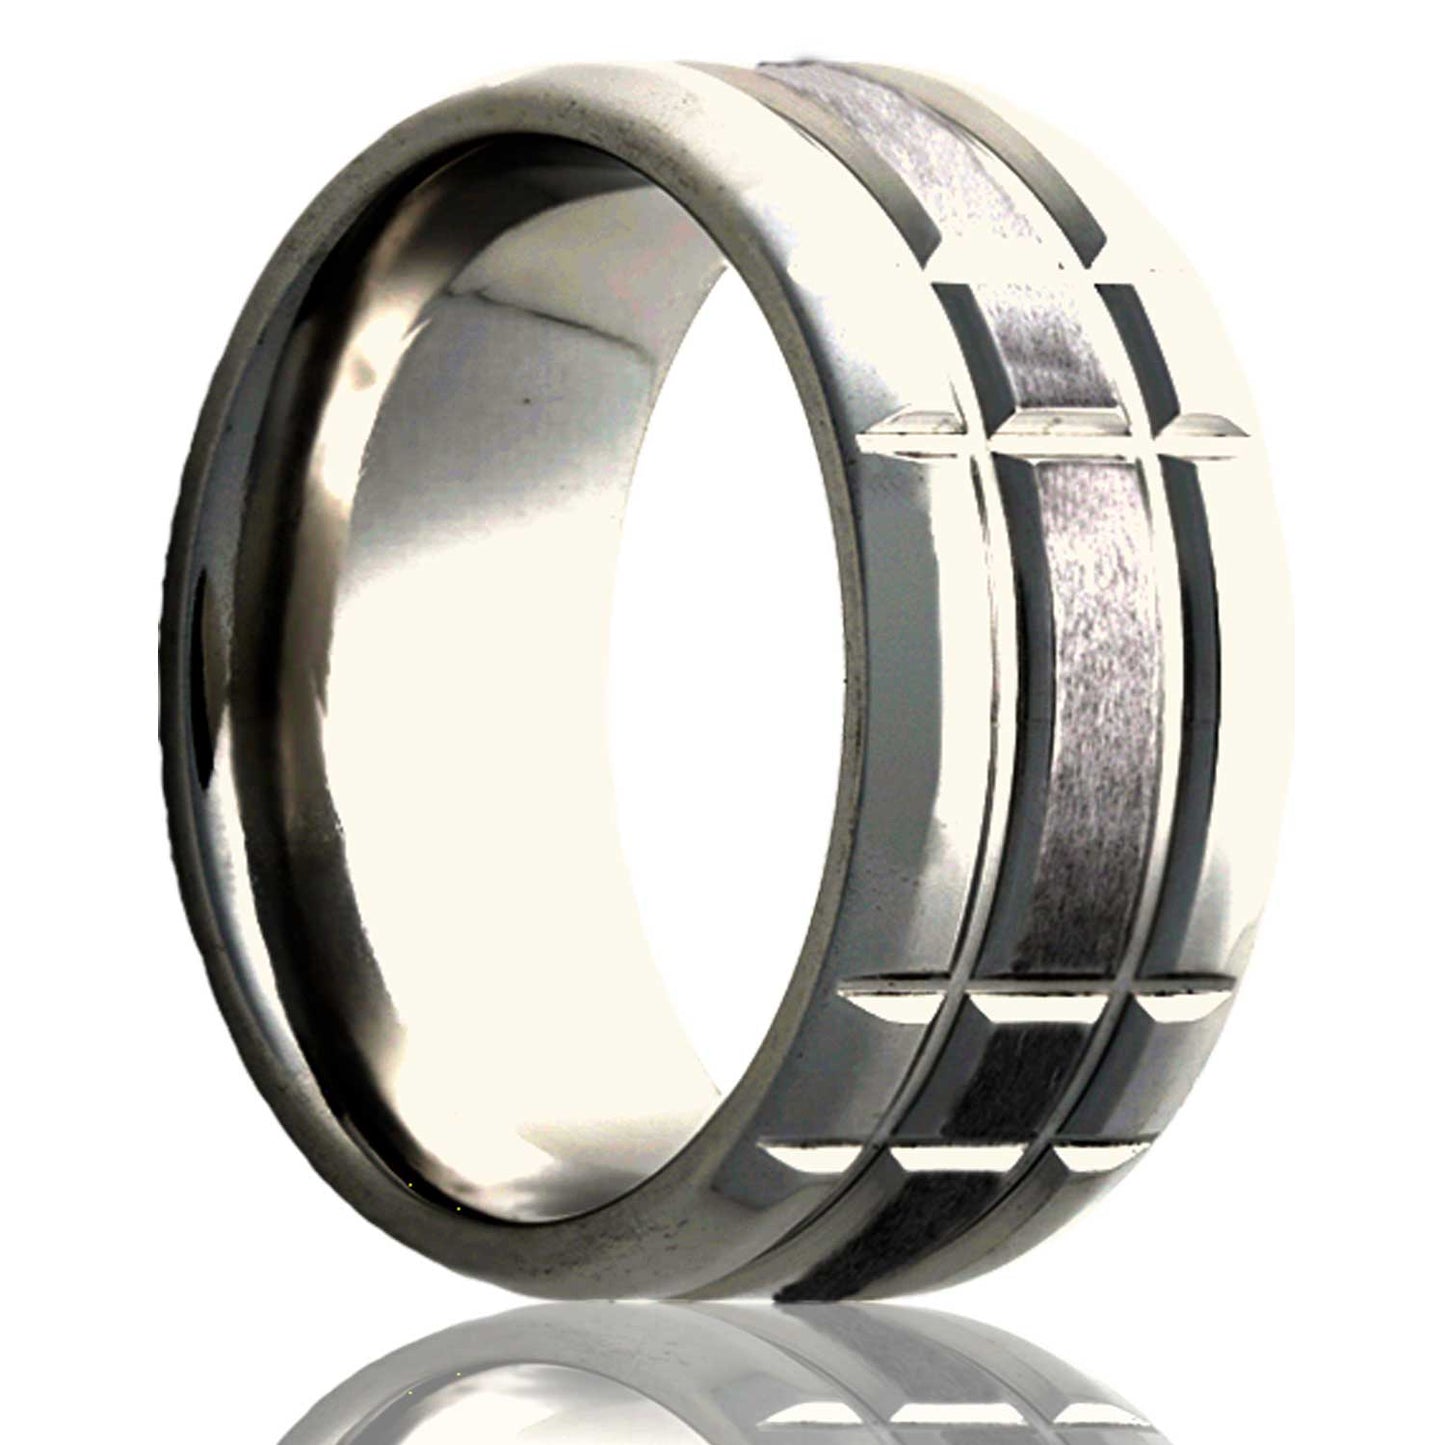 A intersecting grooves satin finish titanium wedding band with beveled edges displayed on a neutral white background.